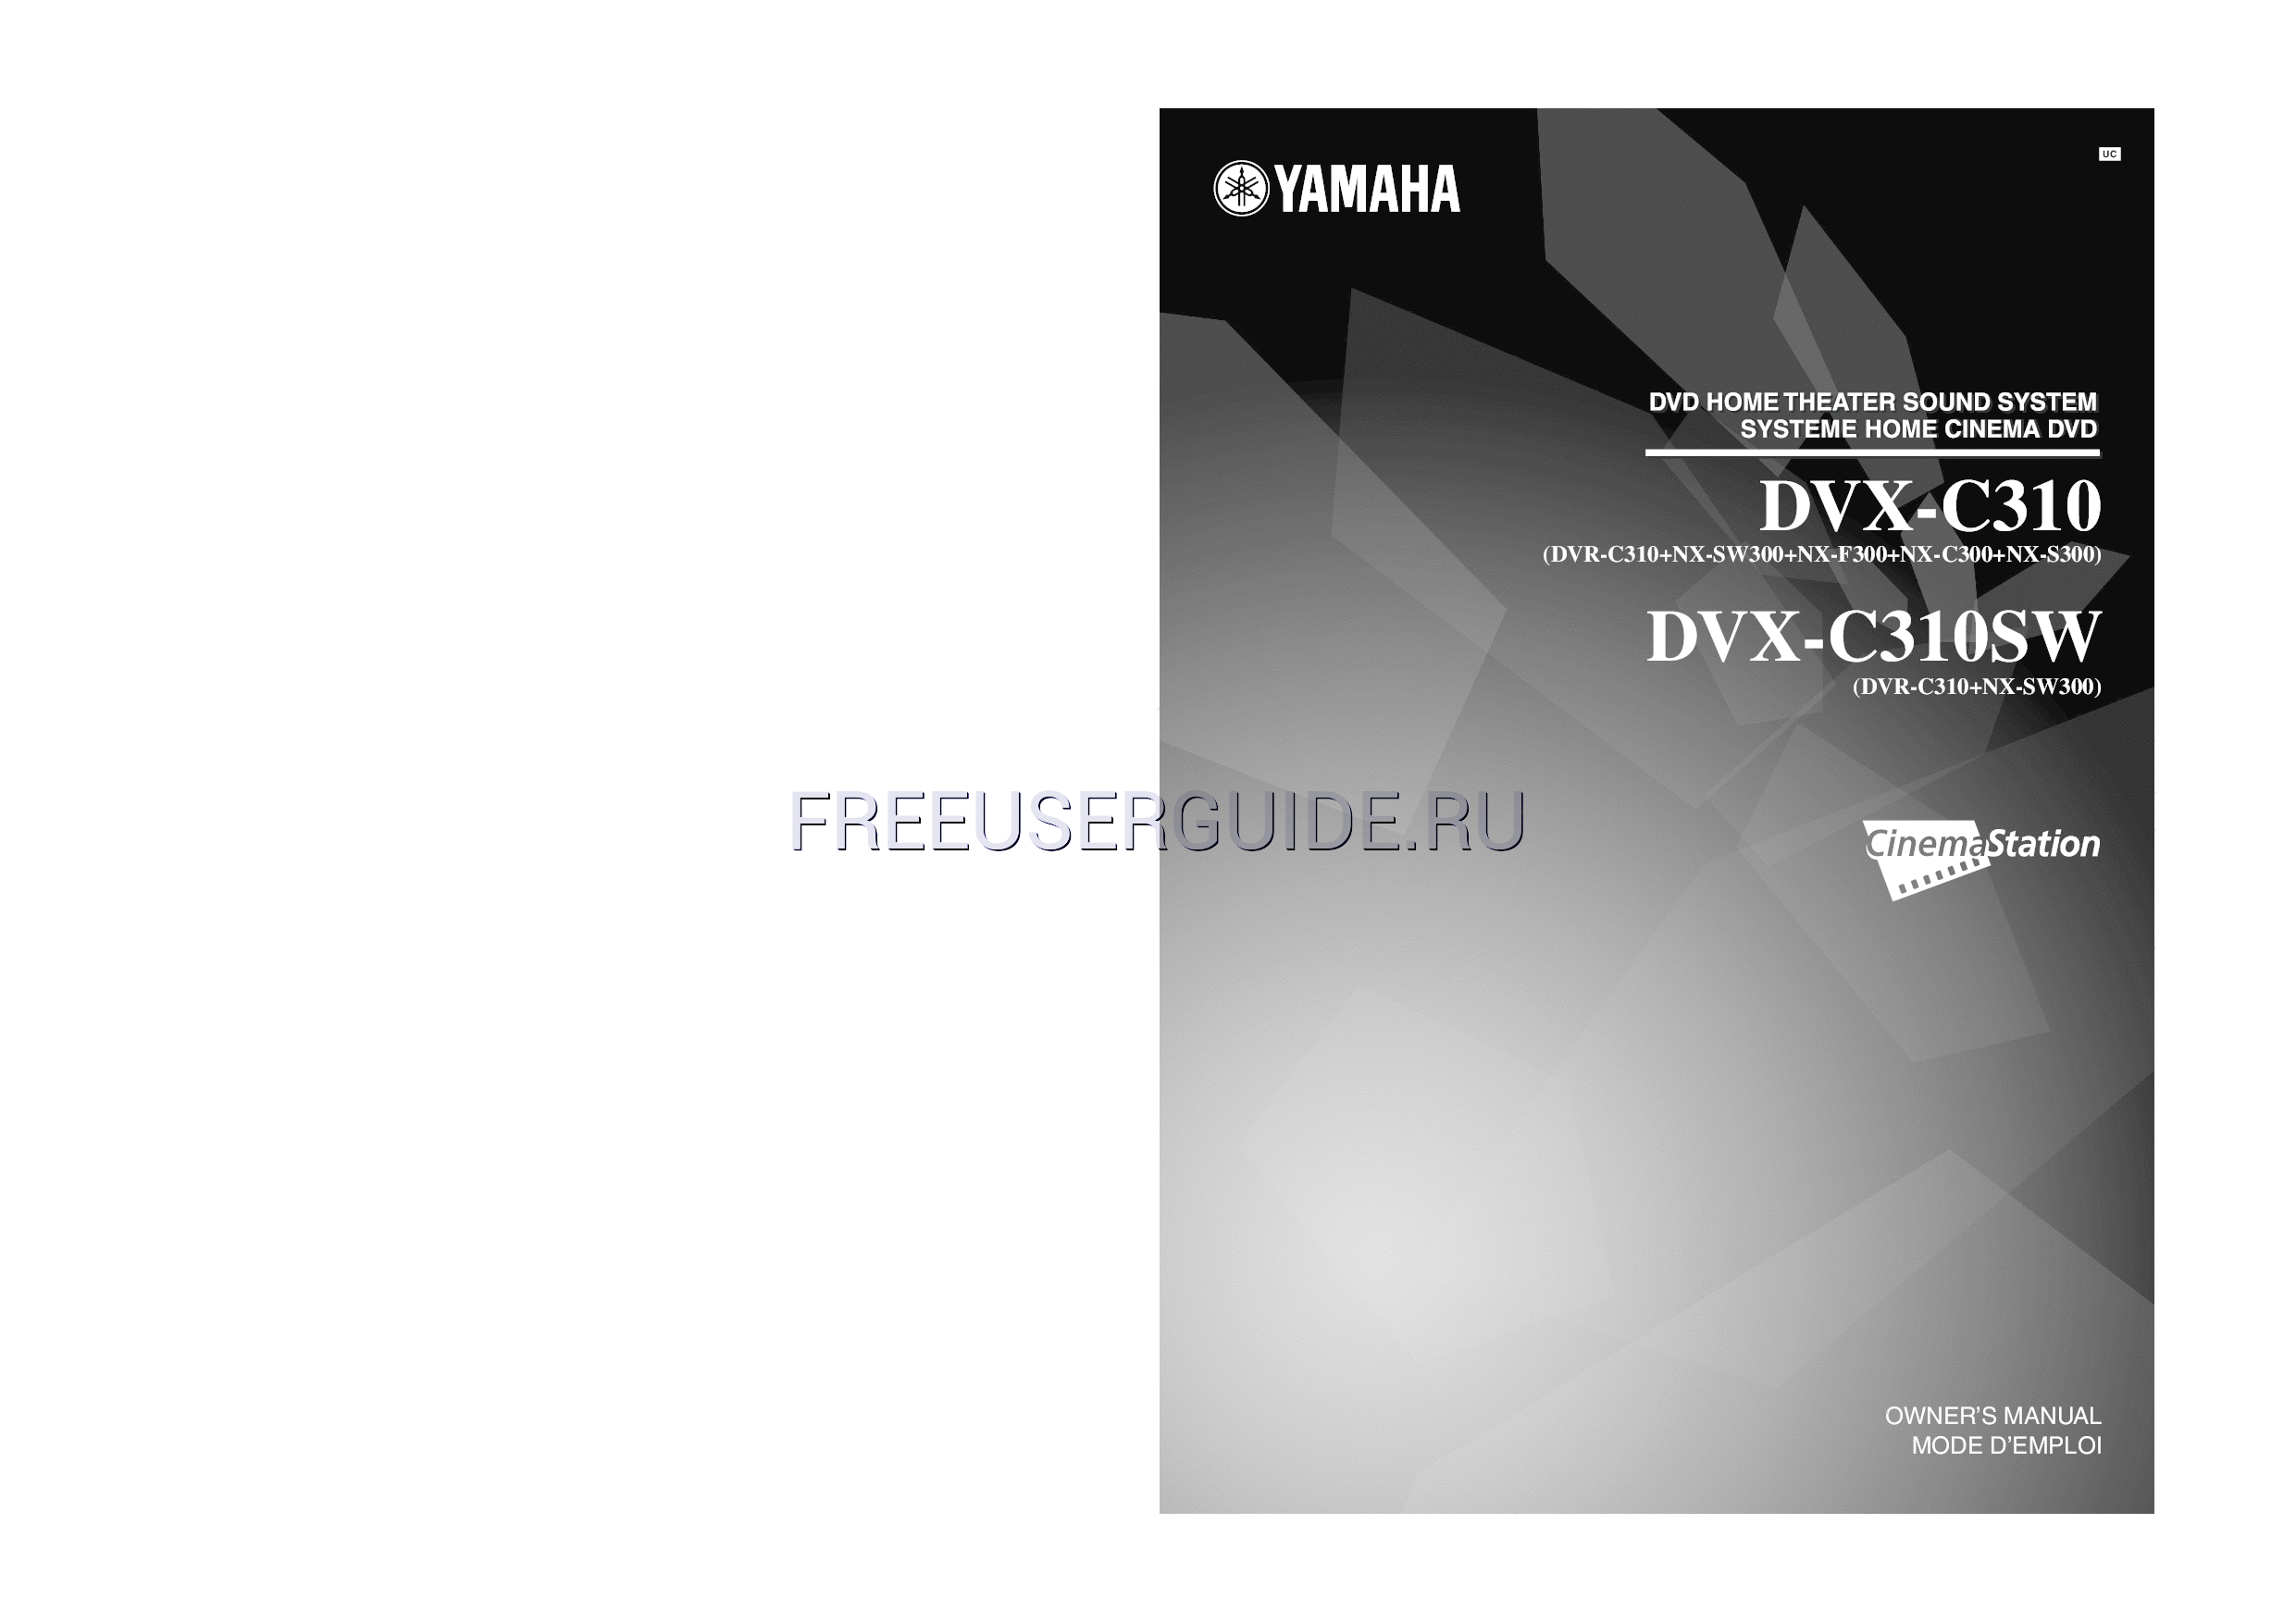 Read online Owner's Manual for Yamaha DVX-C310 (Page 1)